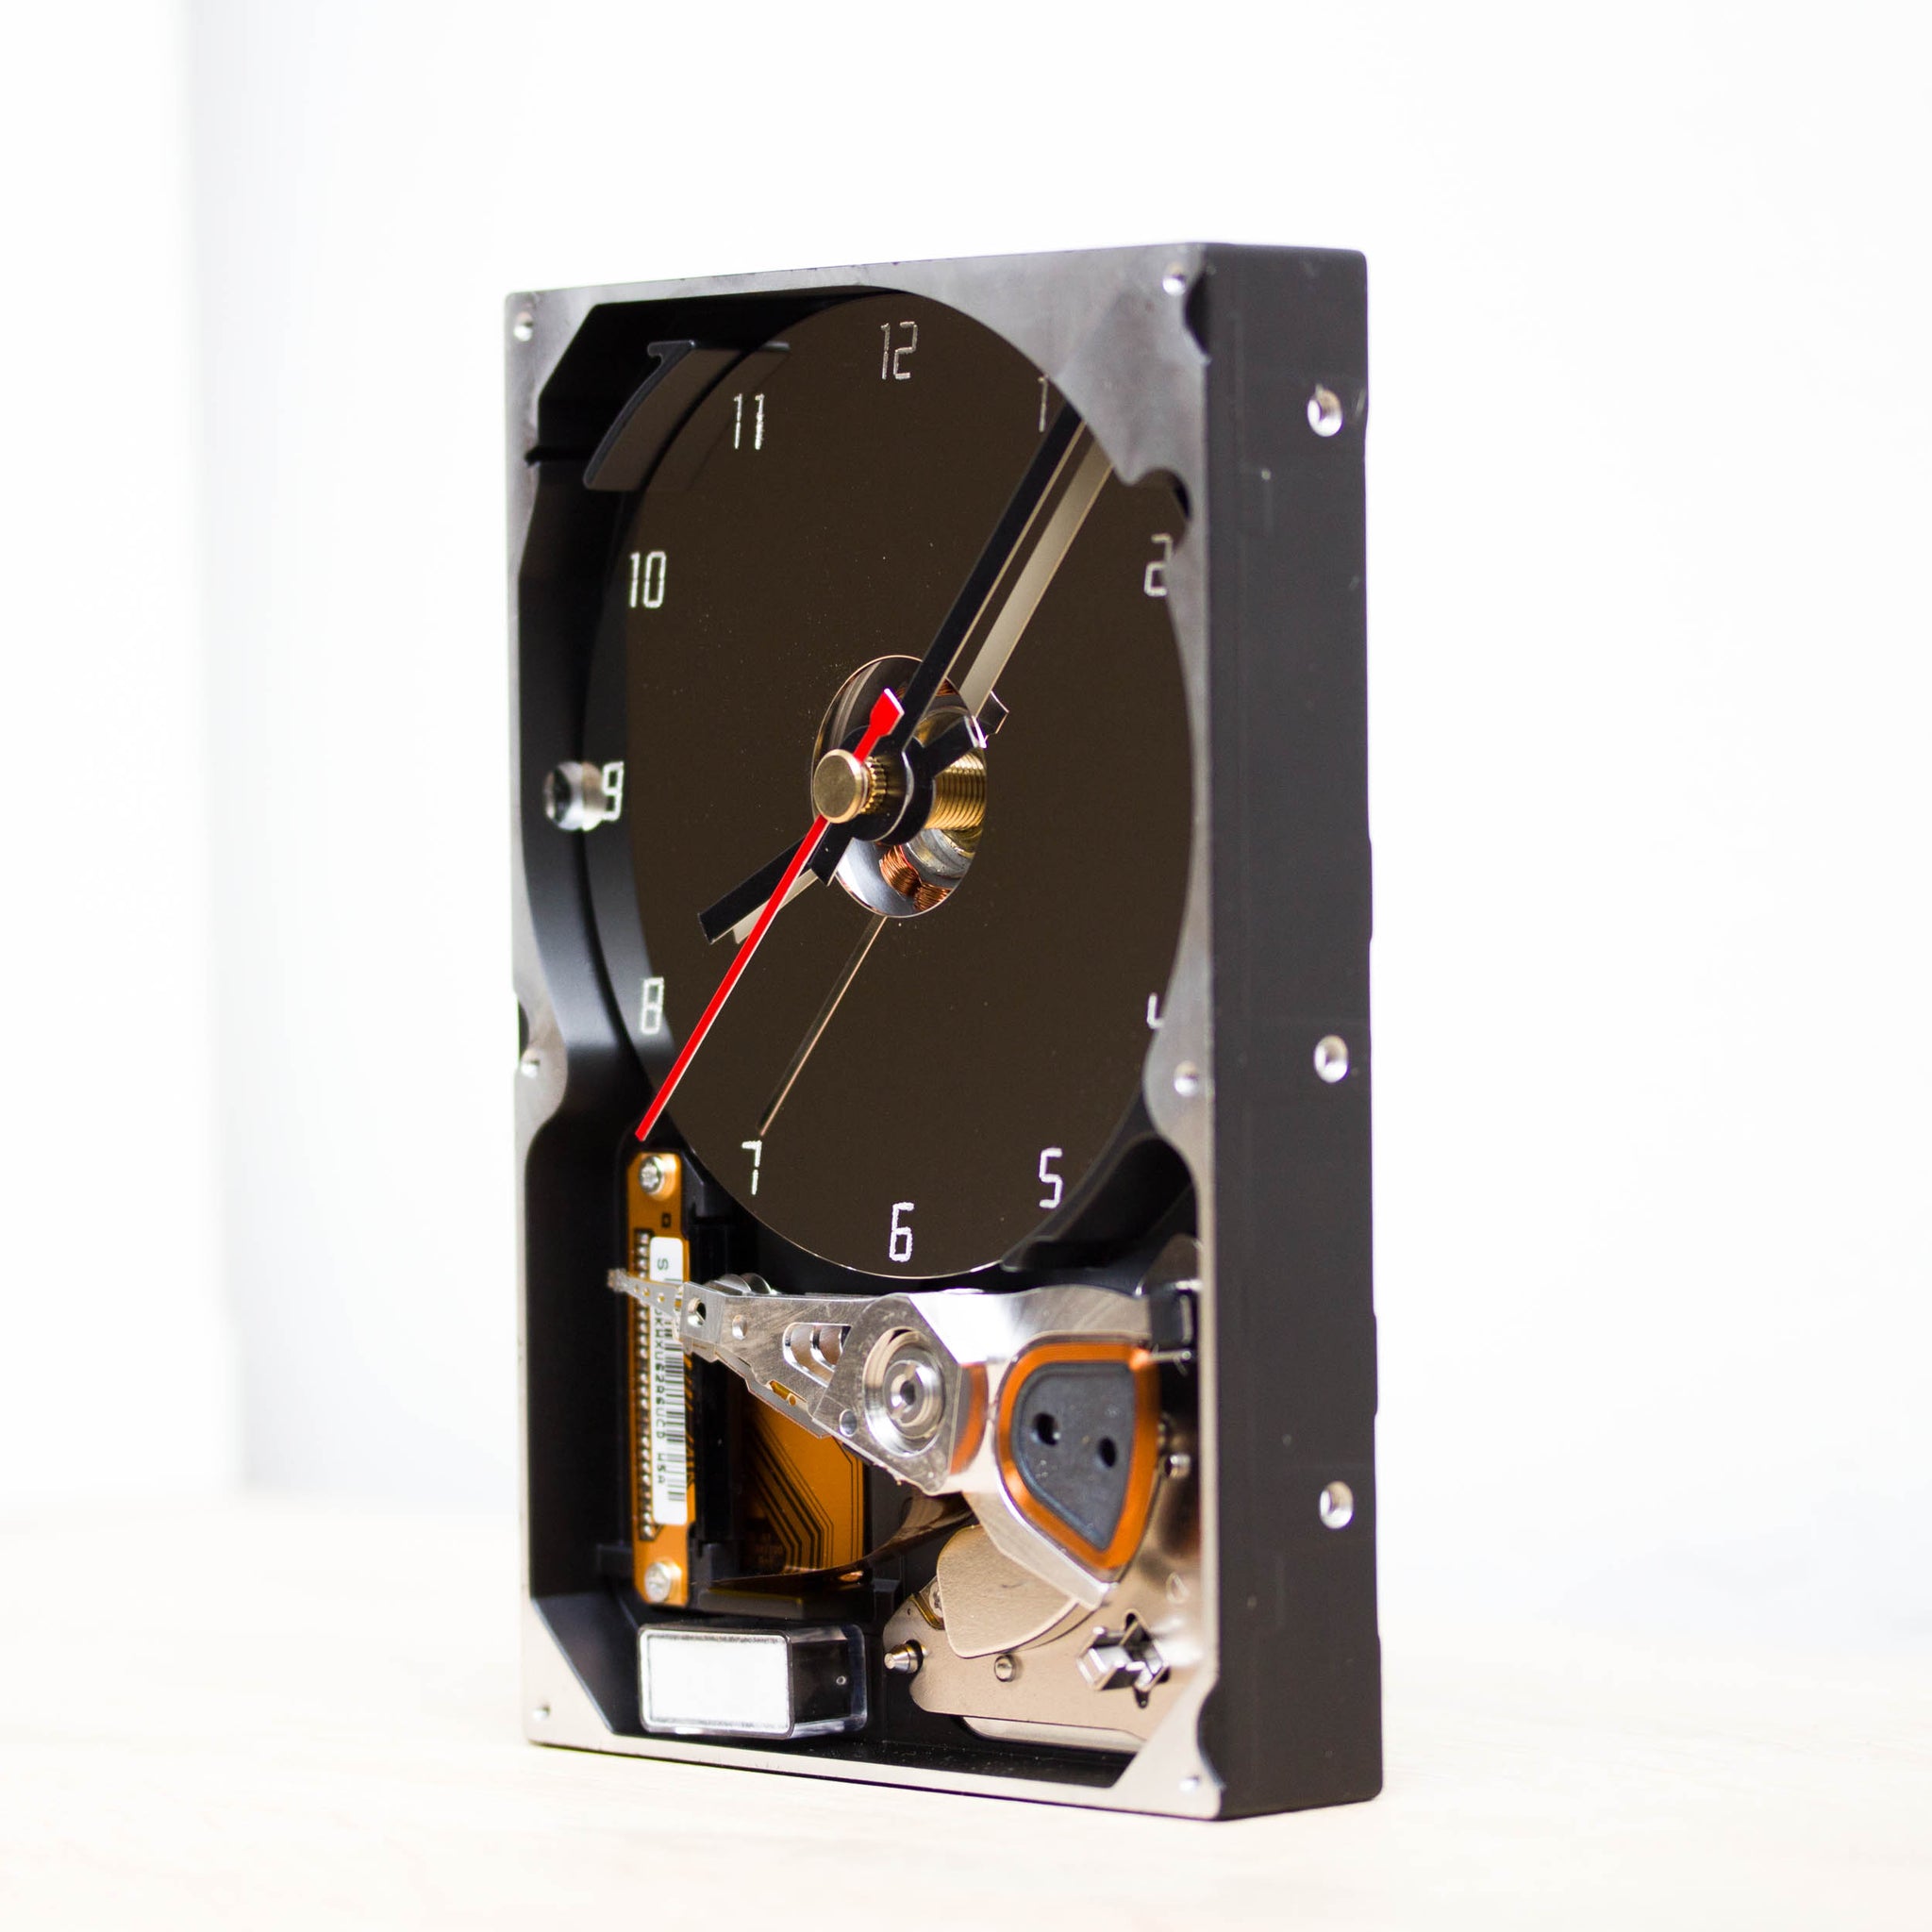 Geeky desk clock made of recycled HDD drive